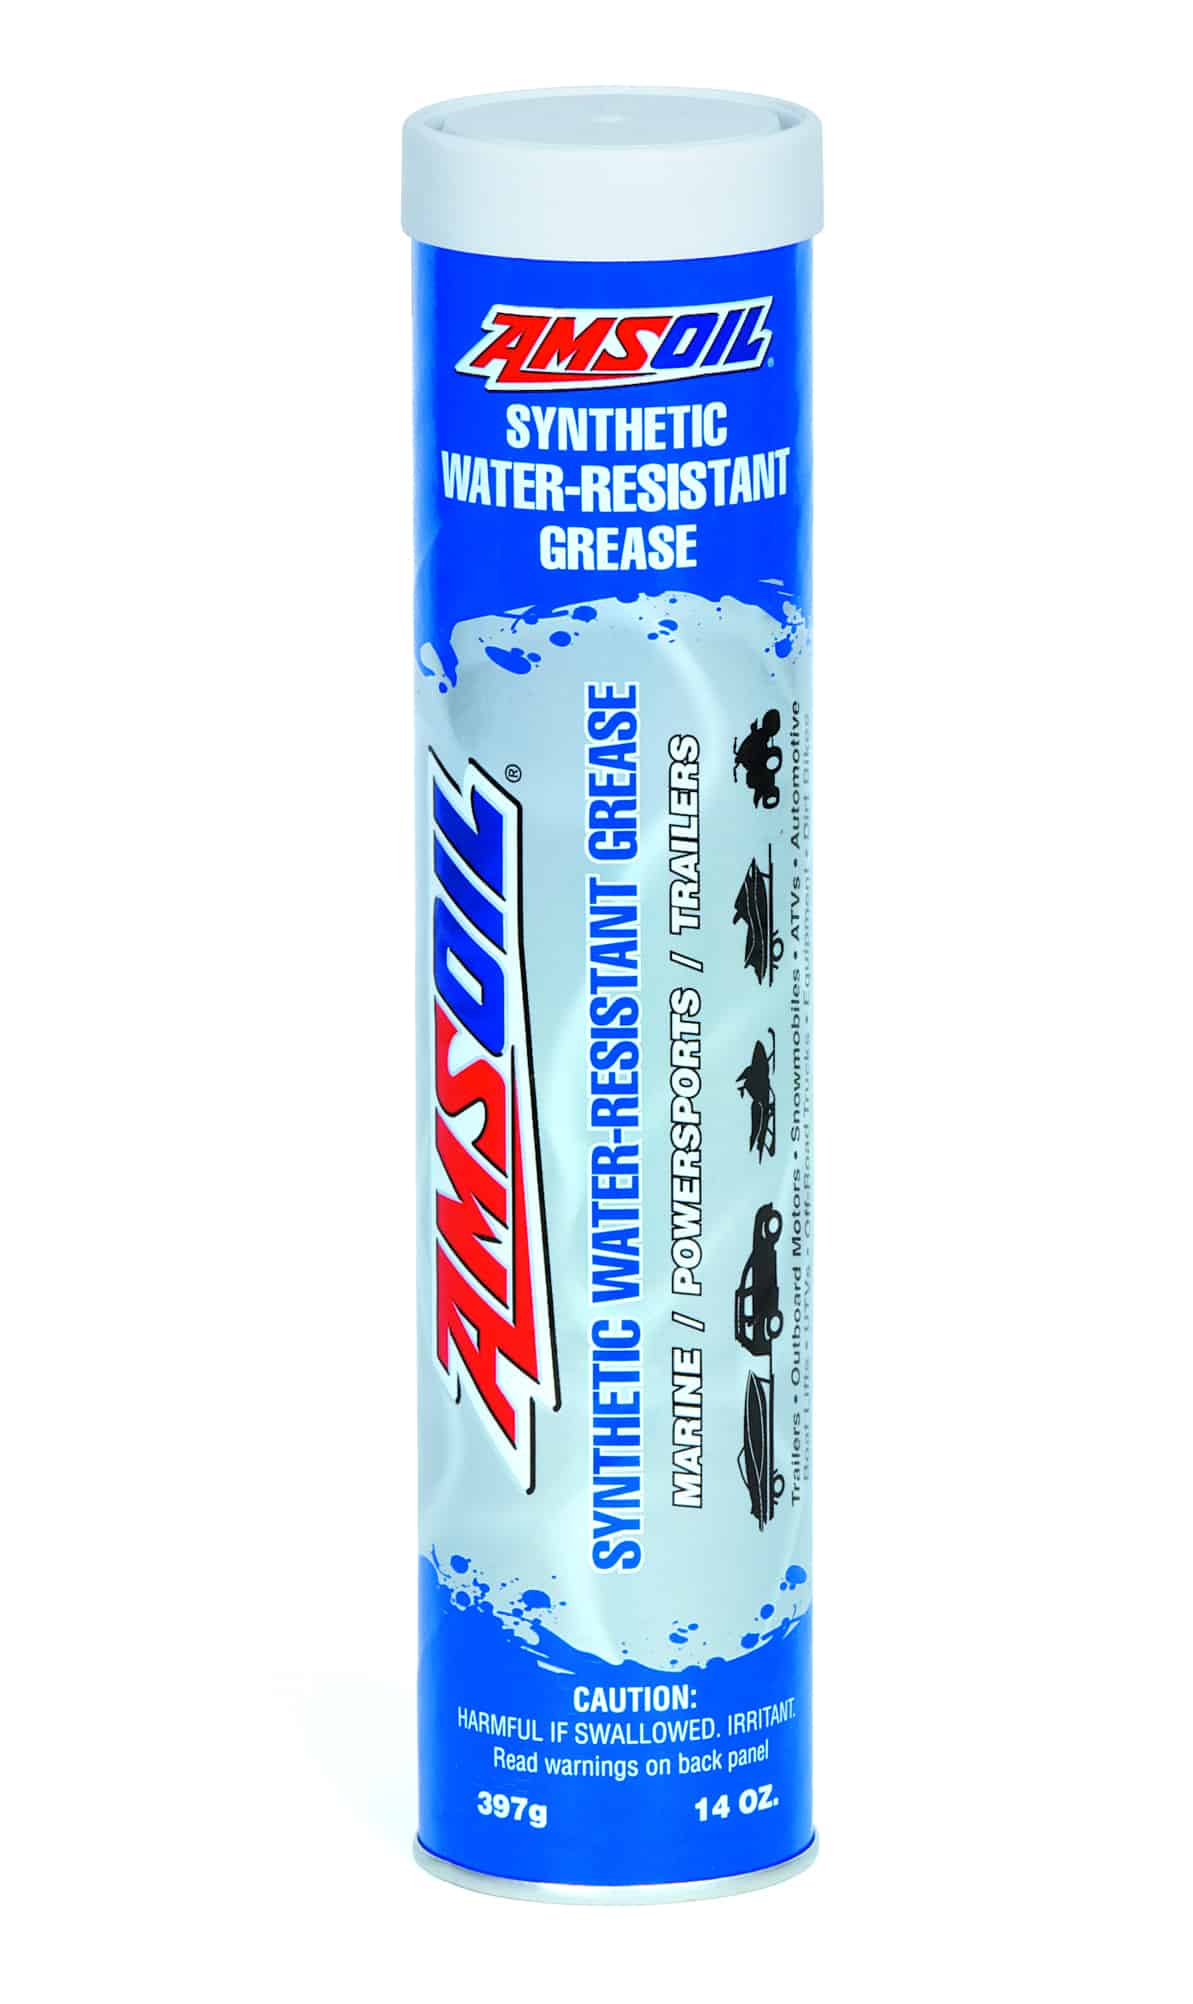 A cartridge of AMSOIL Synthetic Water-Resistant Grease, formulated to provide exceptional film strength, shear resistance, adhesion properties and mechanical stability.
Changing grease is one of the trailer bearings maintenance techniques.